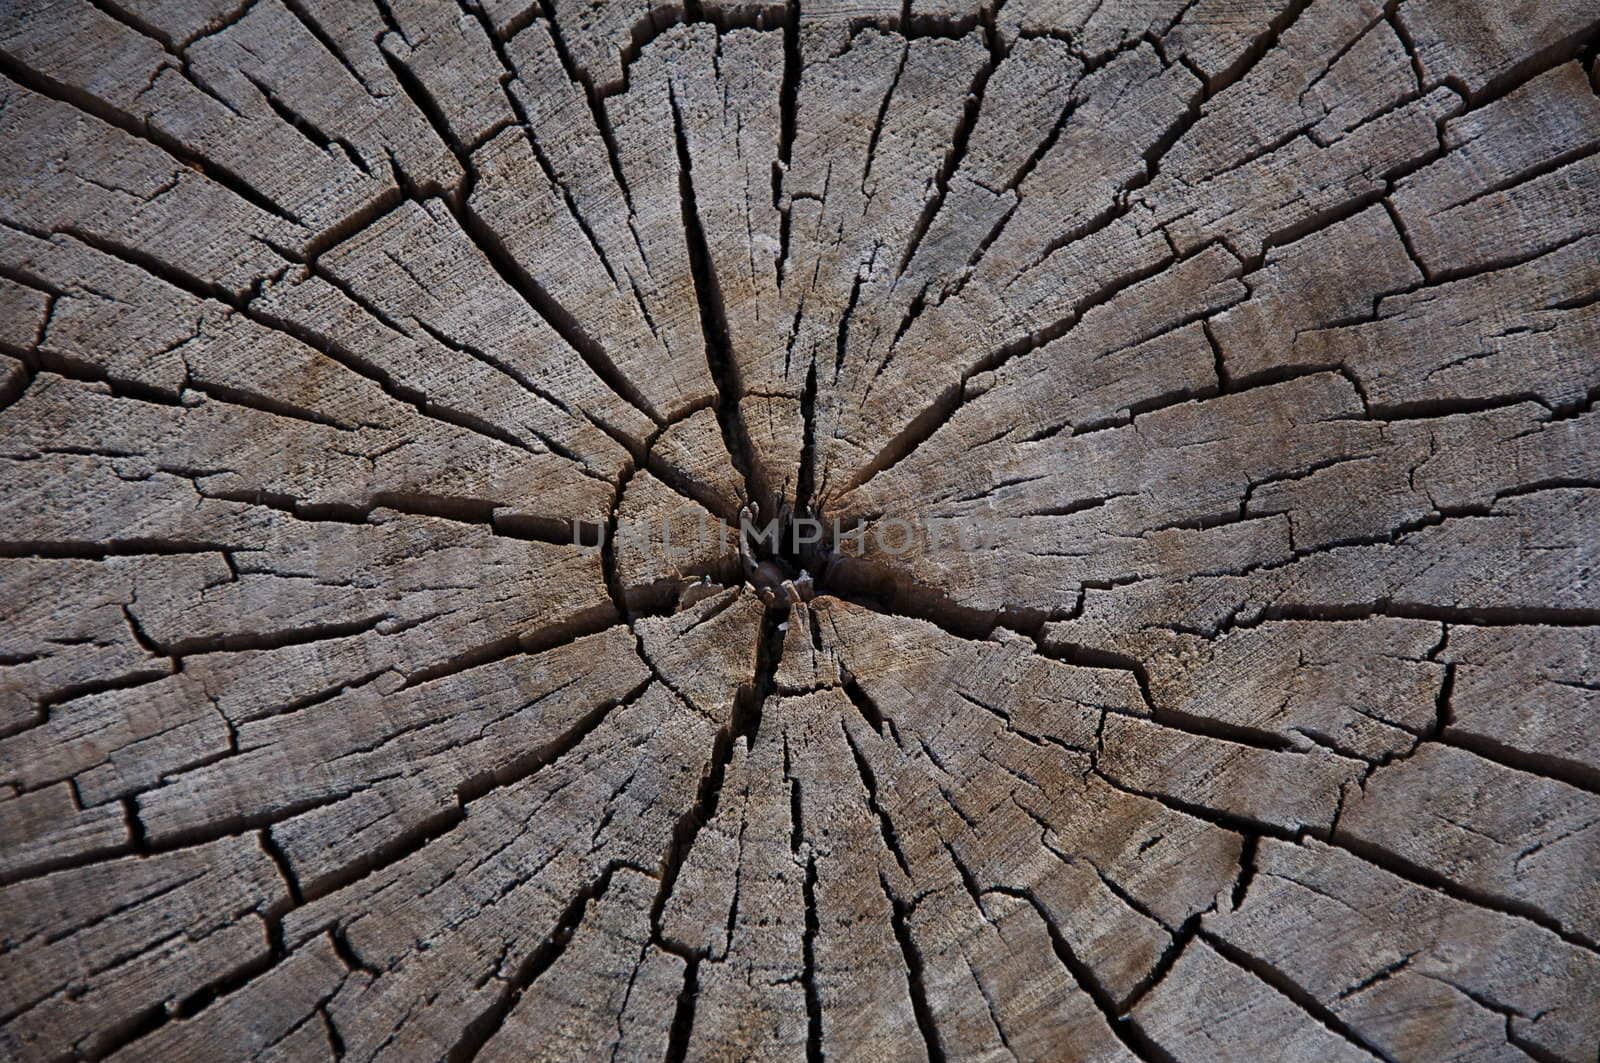 An old log reveals many rings when cut across.